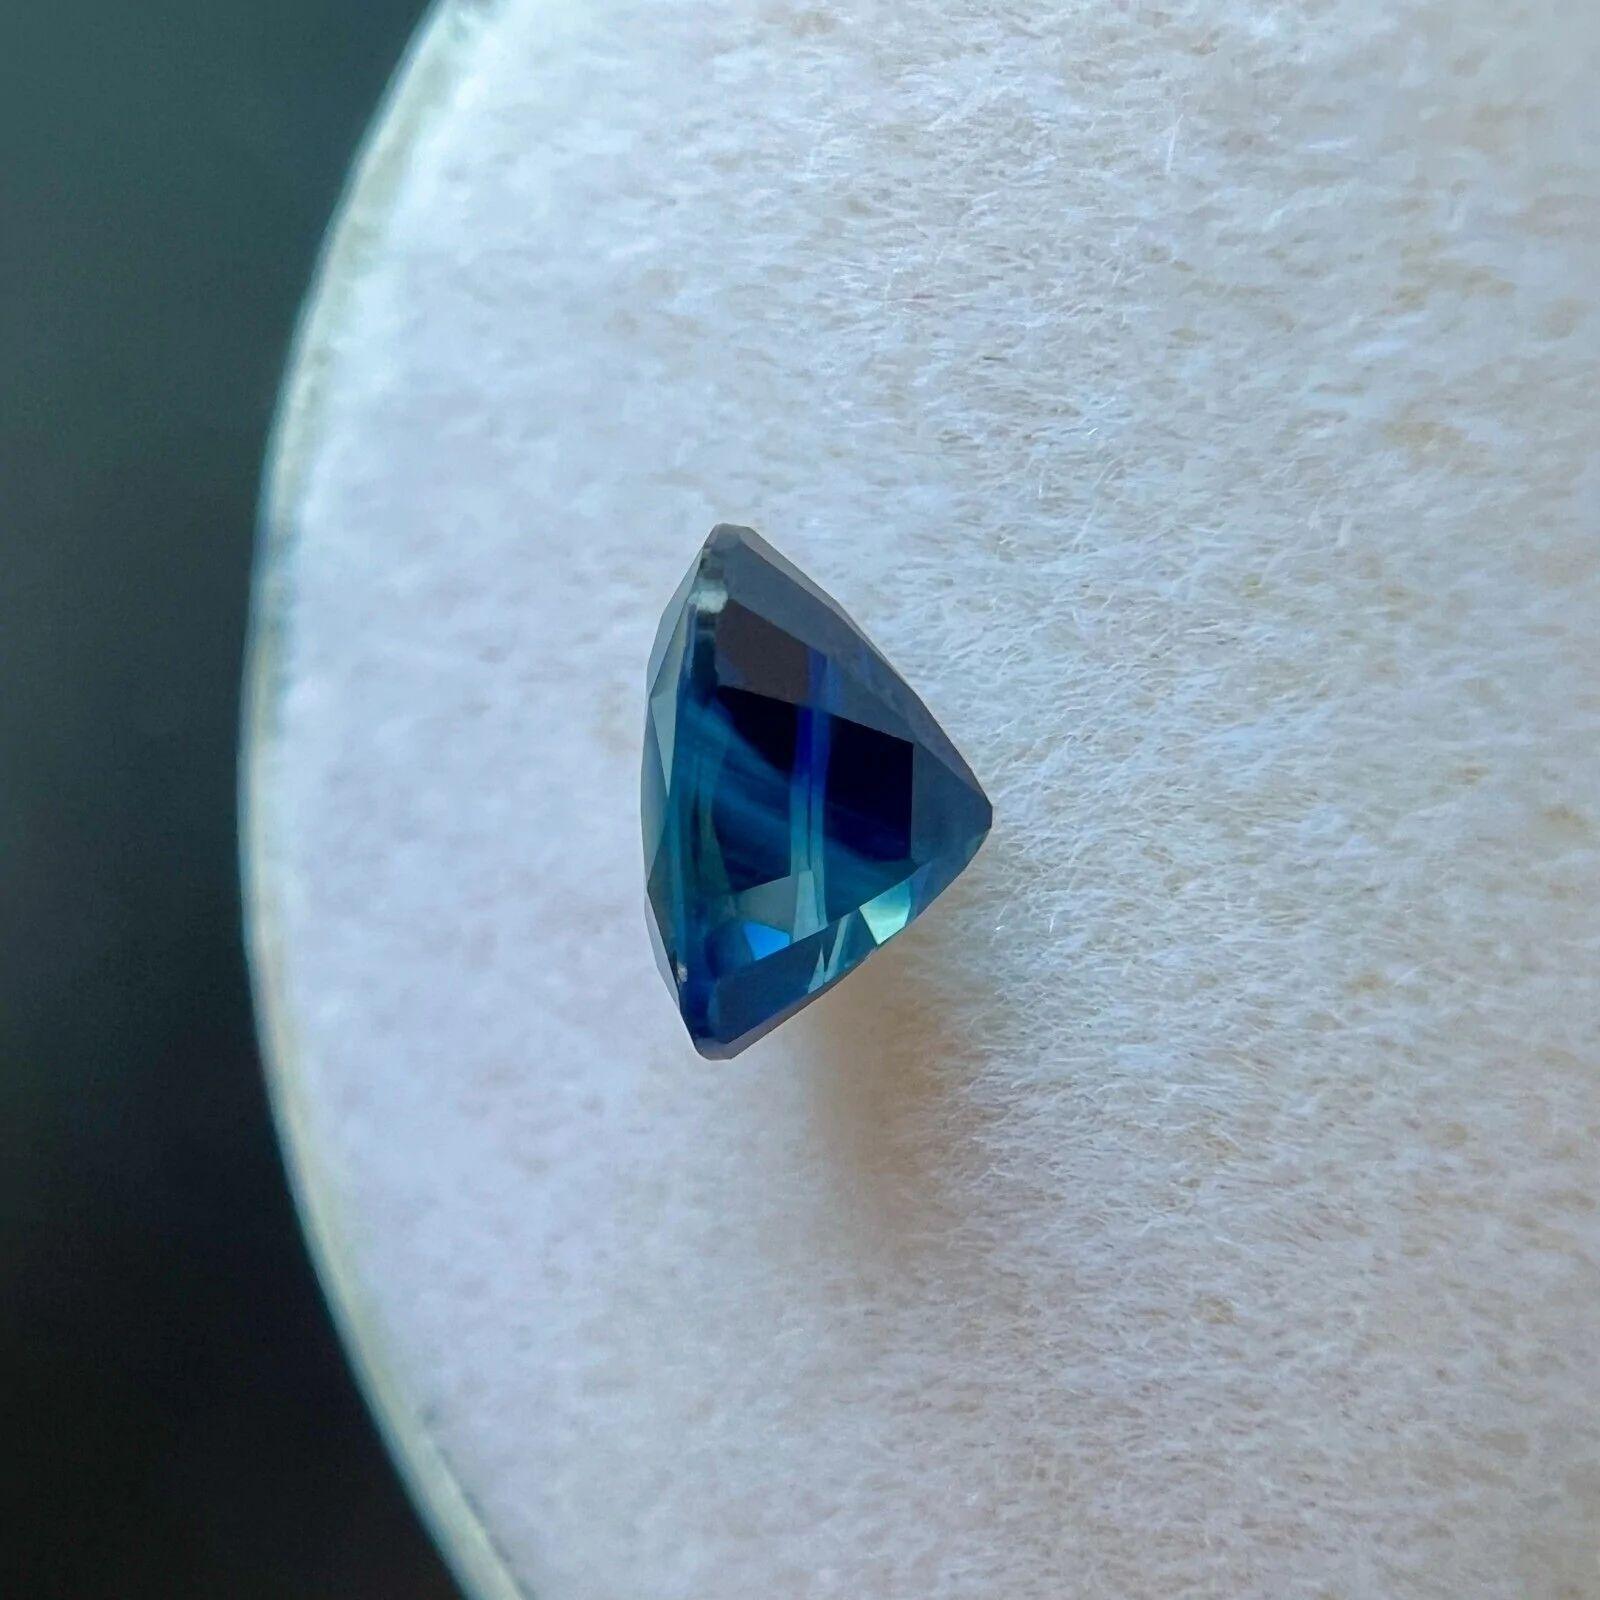 Fine 0.86ct Green Blue Natural Thai Sapphire Oval Cut Rare Gem 6.2x4.5mm VS

Natural Fine Green Blue Thai Sapphire Gemstone.
0.86 Carat with a beautiful vivid green blue colour and good clarity, a clean stone with only some small natural inclusions